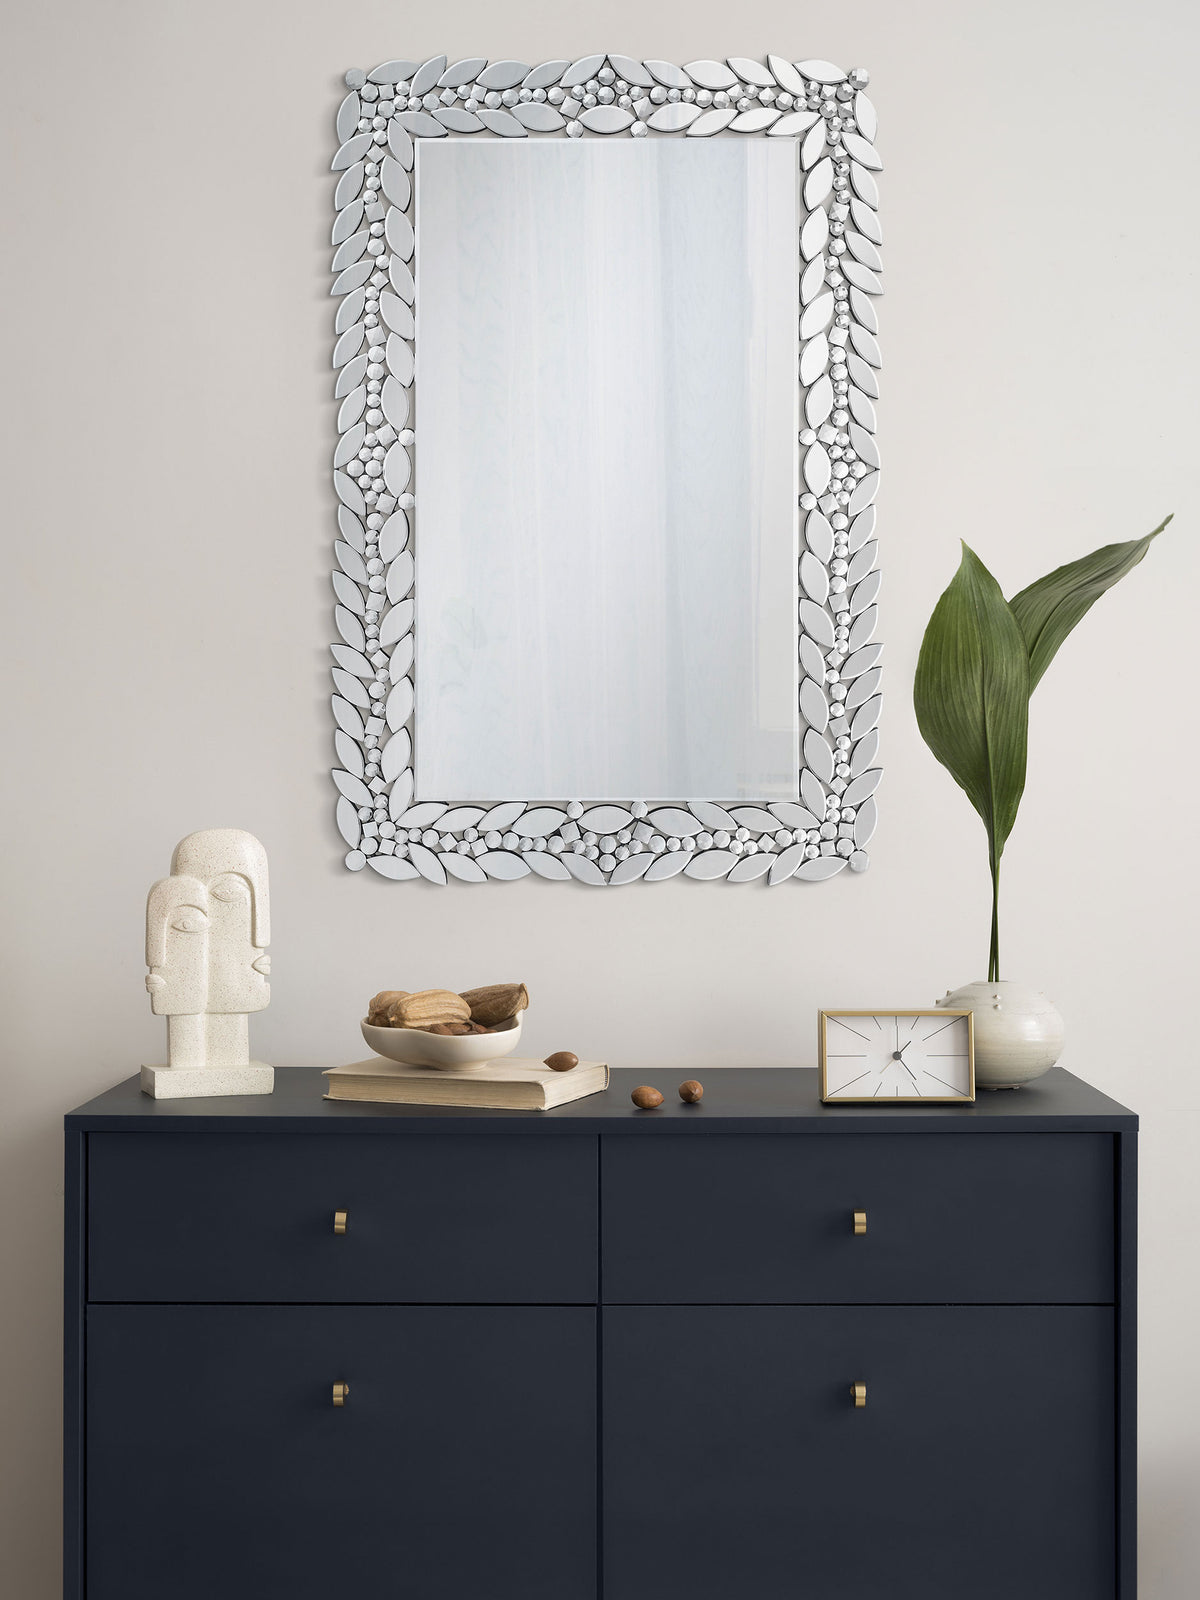 Cecily Rectangular Leaves Frame Wall Mirror Faux Crystal Cecily Rectangular Leaves Frame Wall Mirror Faux Crystal Half Price Furniture